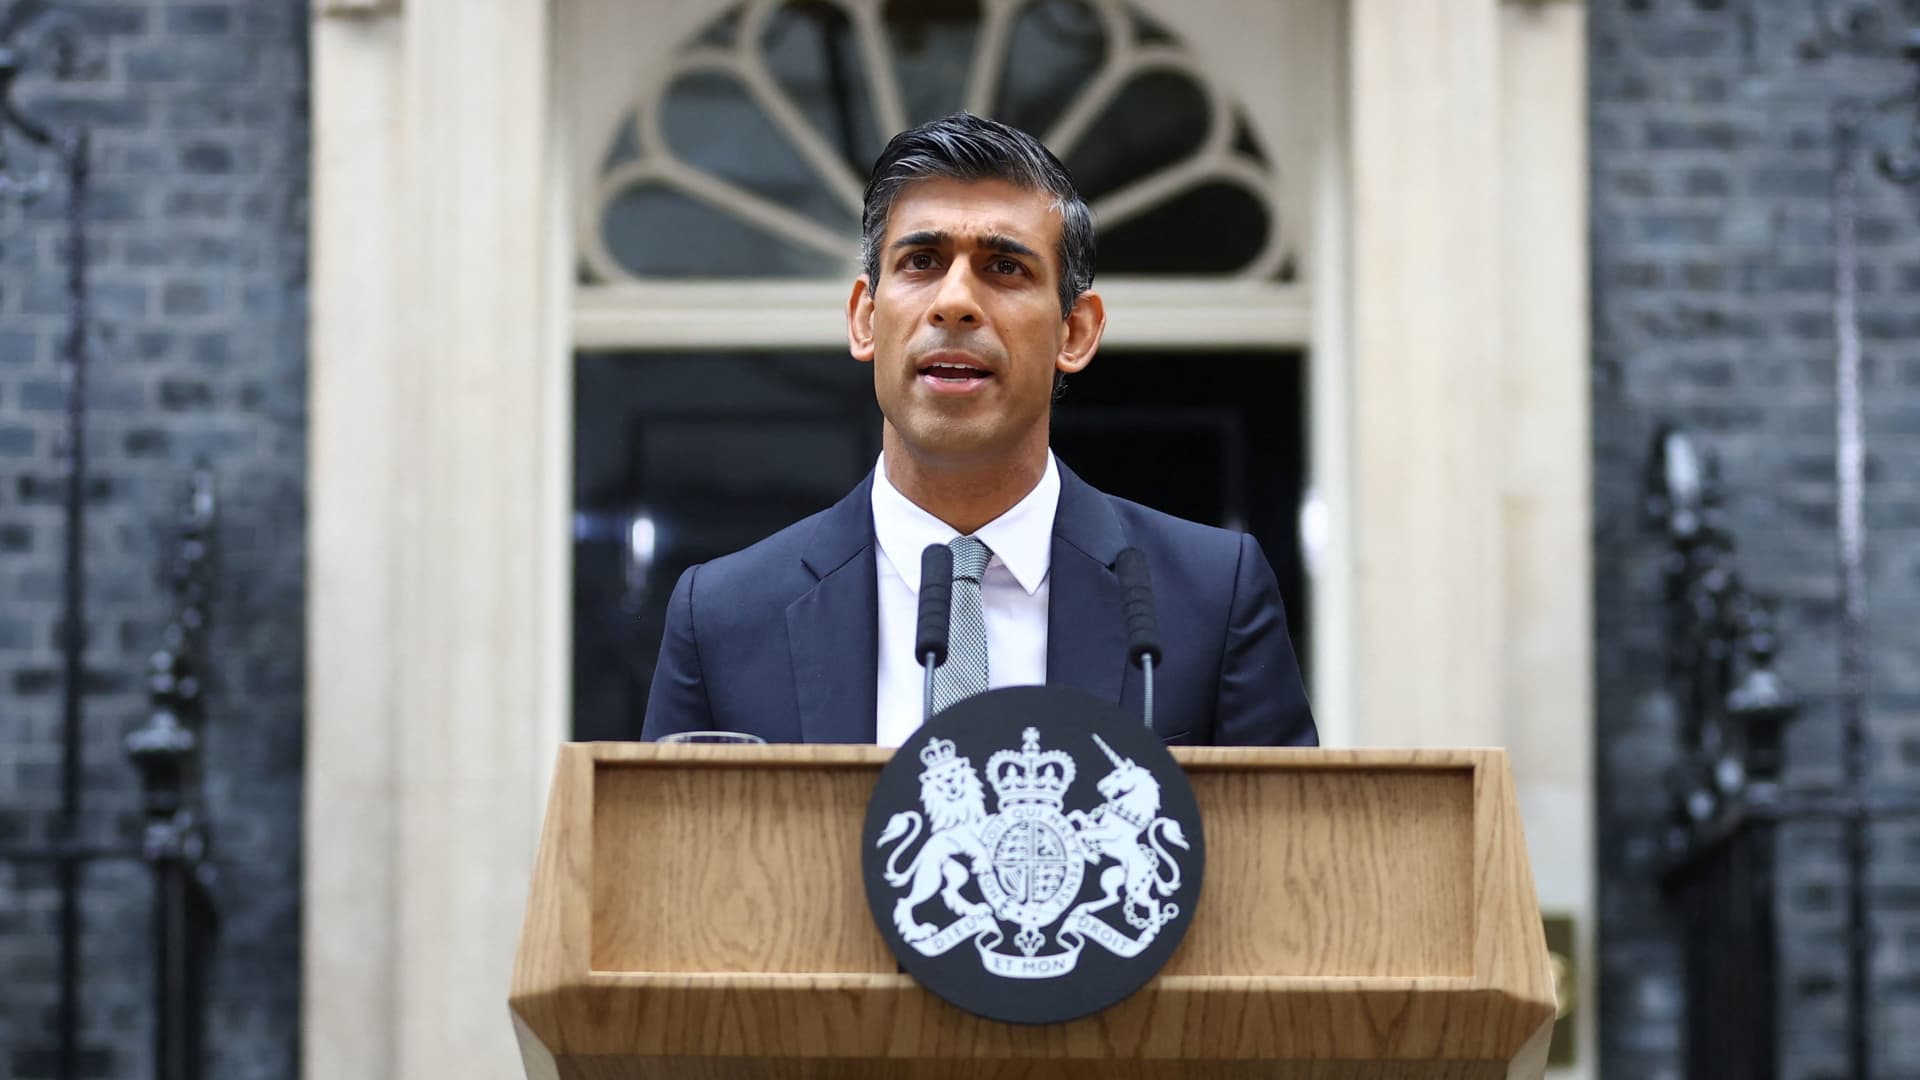 ‘Our nation is dealing with a profound financial disaster’: Rishi Sunak pledges to repair errors as he turns into UK PM